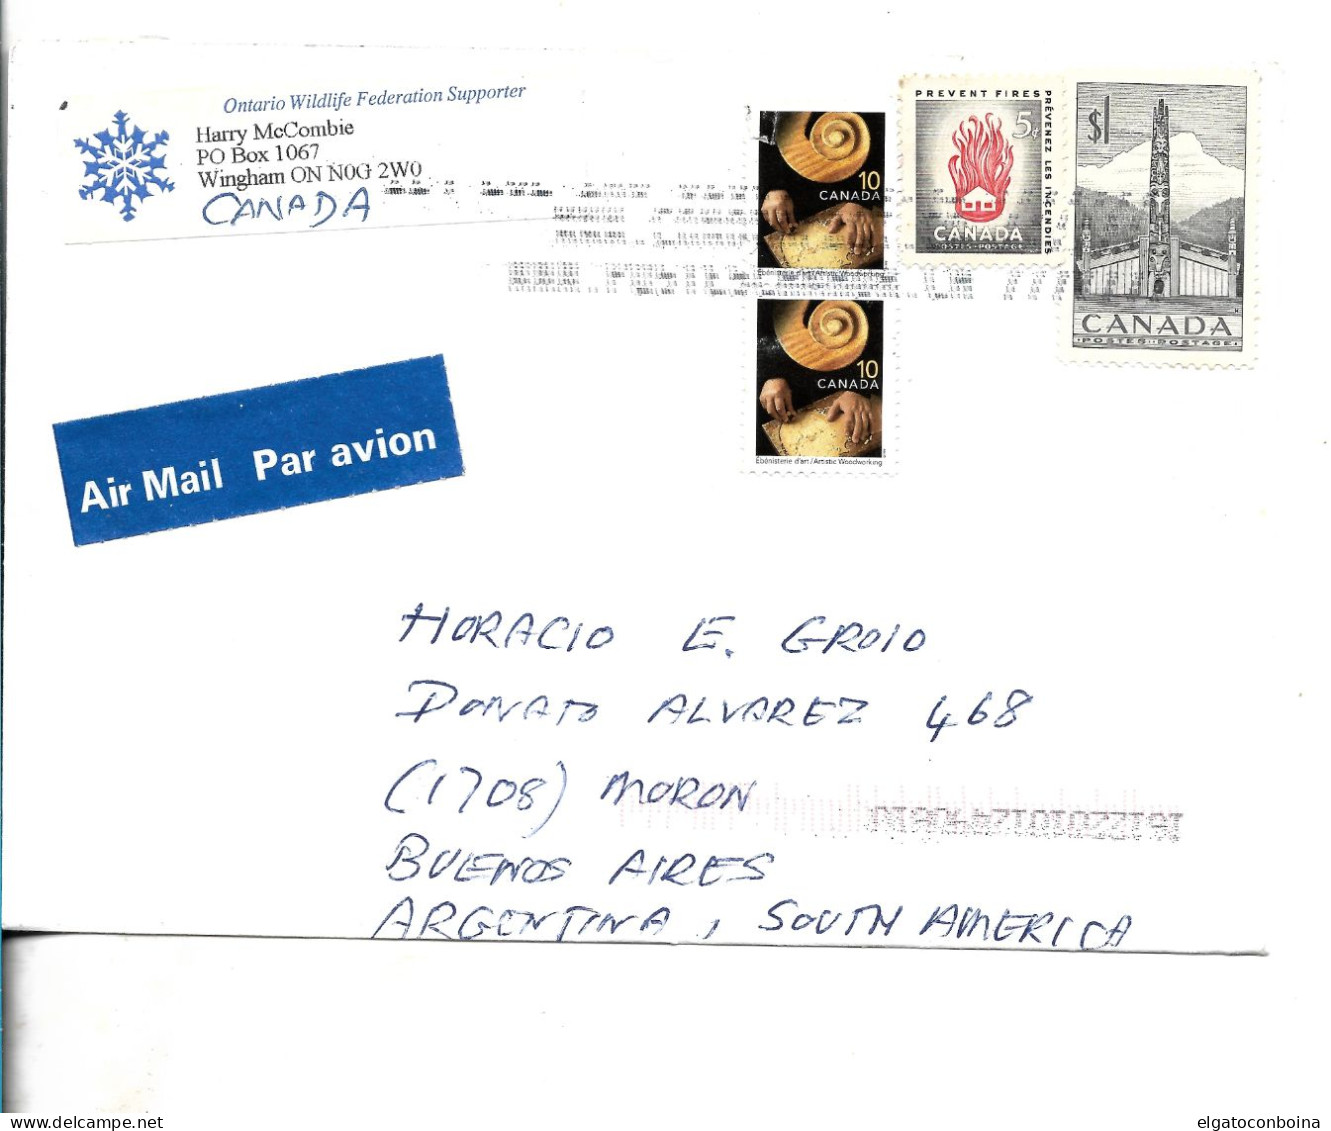 CANADA CIRCULATED COVER NATIVE AMERICAN ARTCRAFTS MONUMENTS POSTED COVER - Postal History